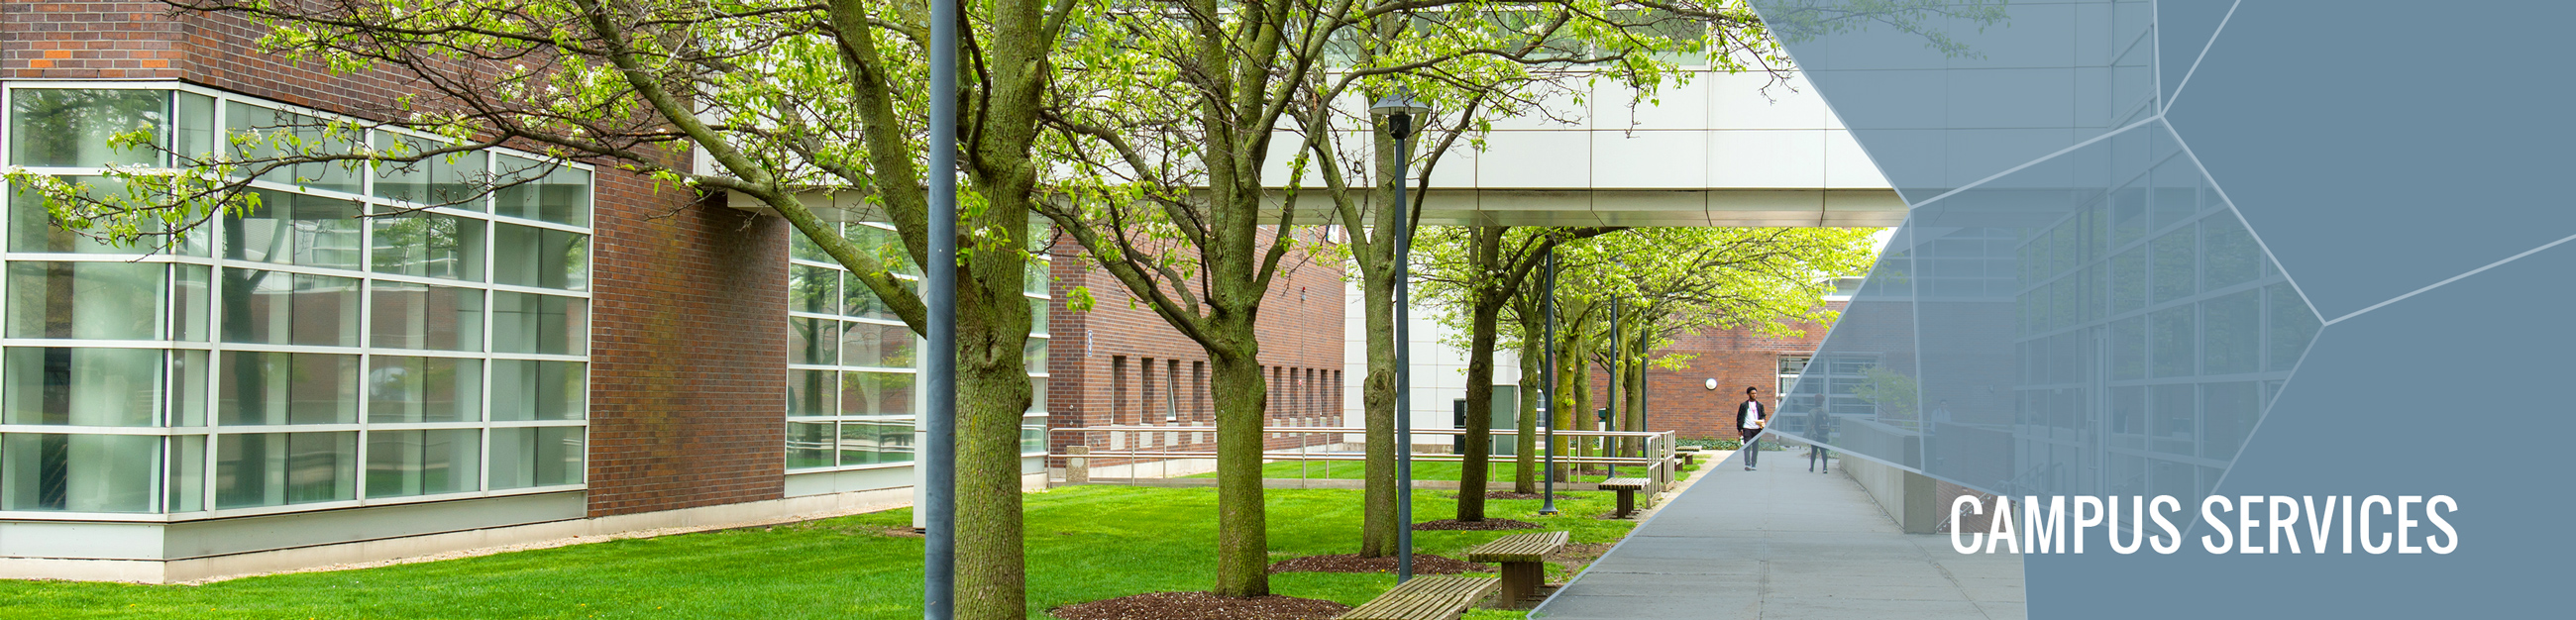 Campus buildings, trees, and benches.